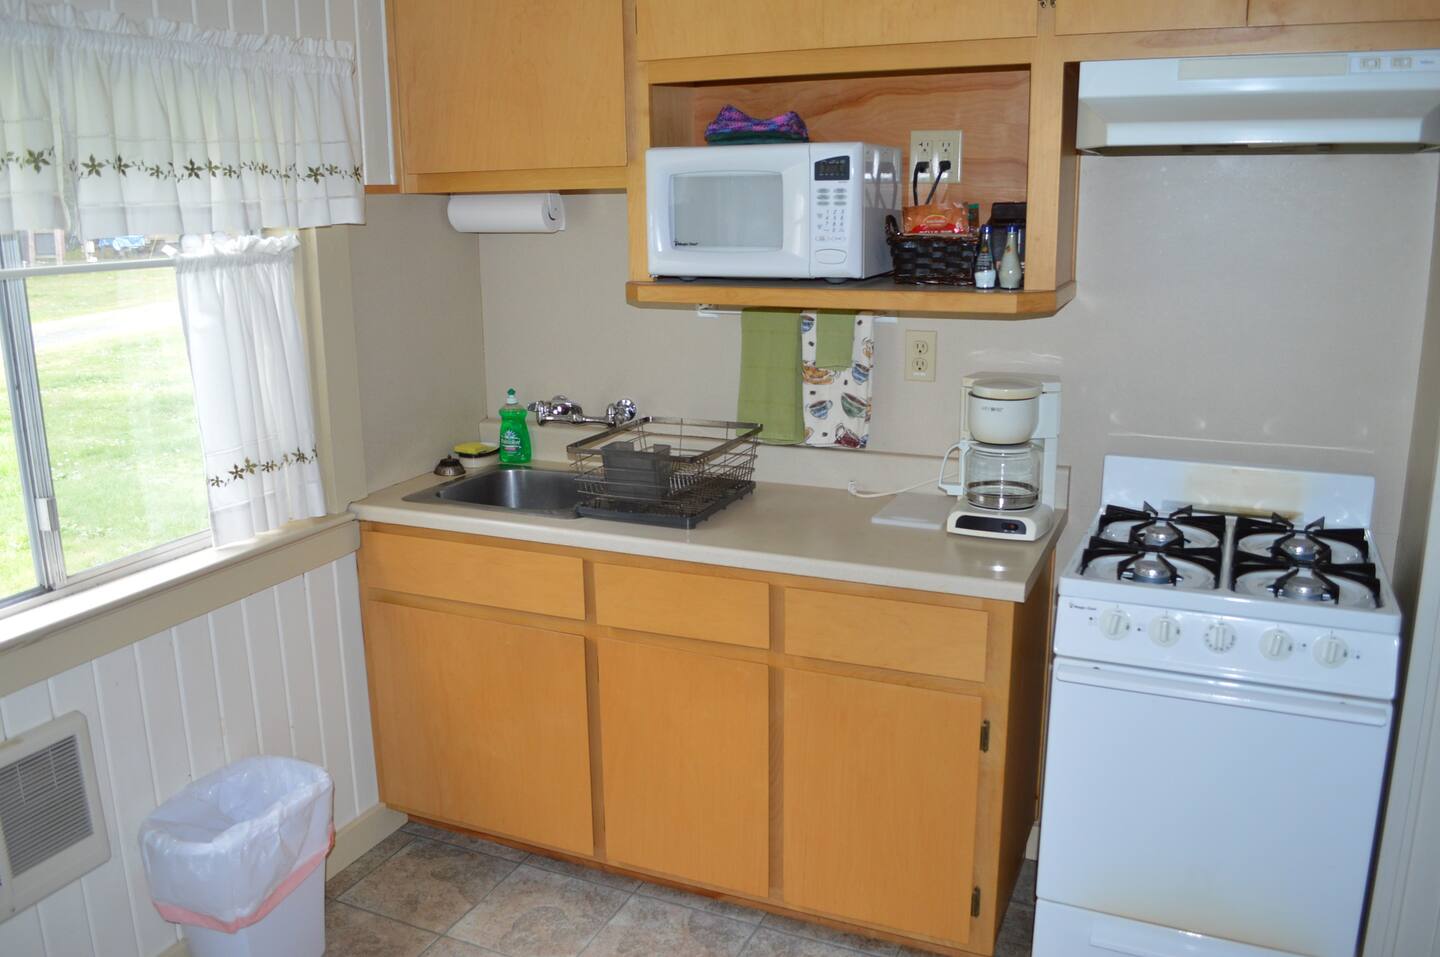 The kitchen, which adjoins the living space has a full fridge, microwave, small range oven, toaster, and coffee maker.